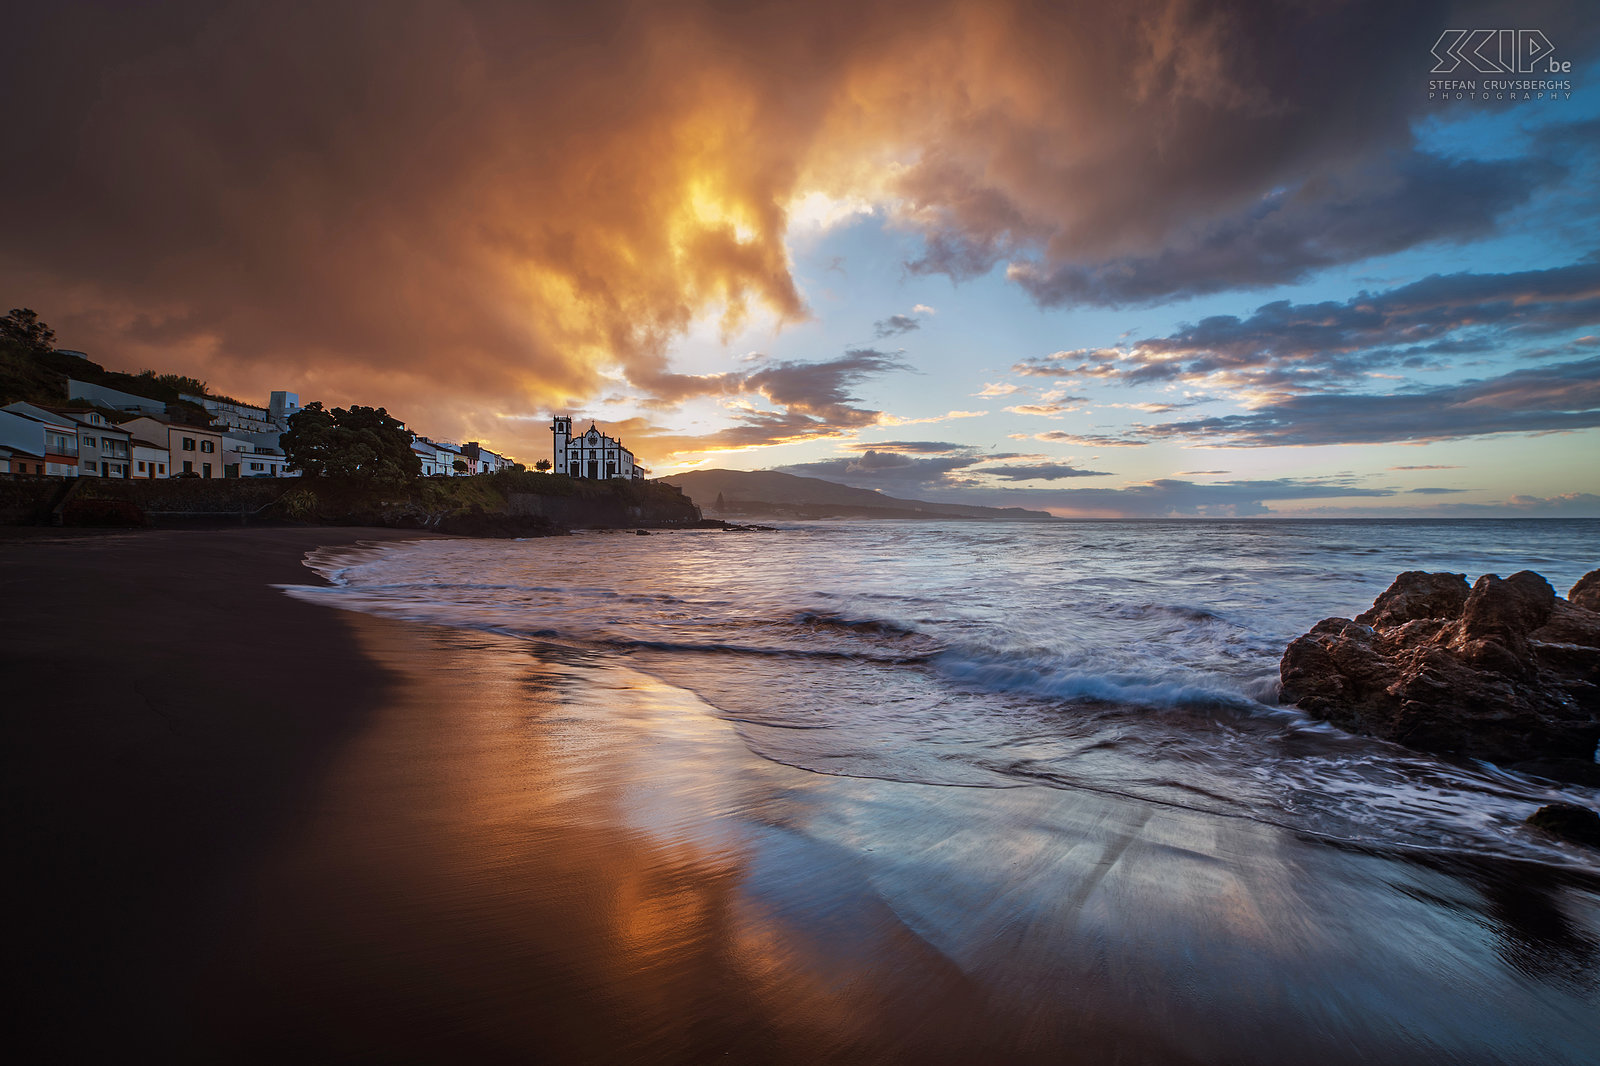 Sunrise Sao Roque Threatening rain clouds at sunrise on the black sandy beach of São Roque with in the background the white church. A few minutes later there was a rain storm. Stefan Cruysberghs